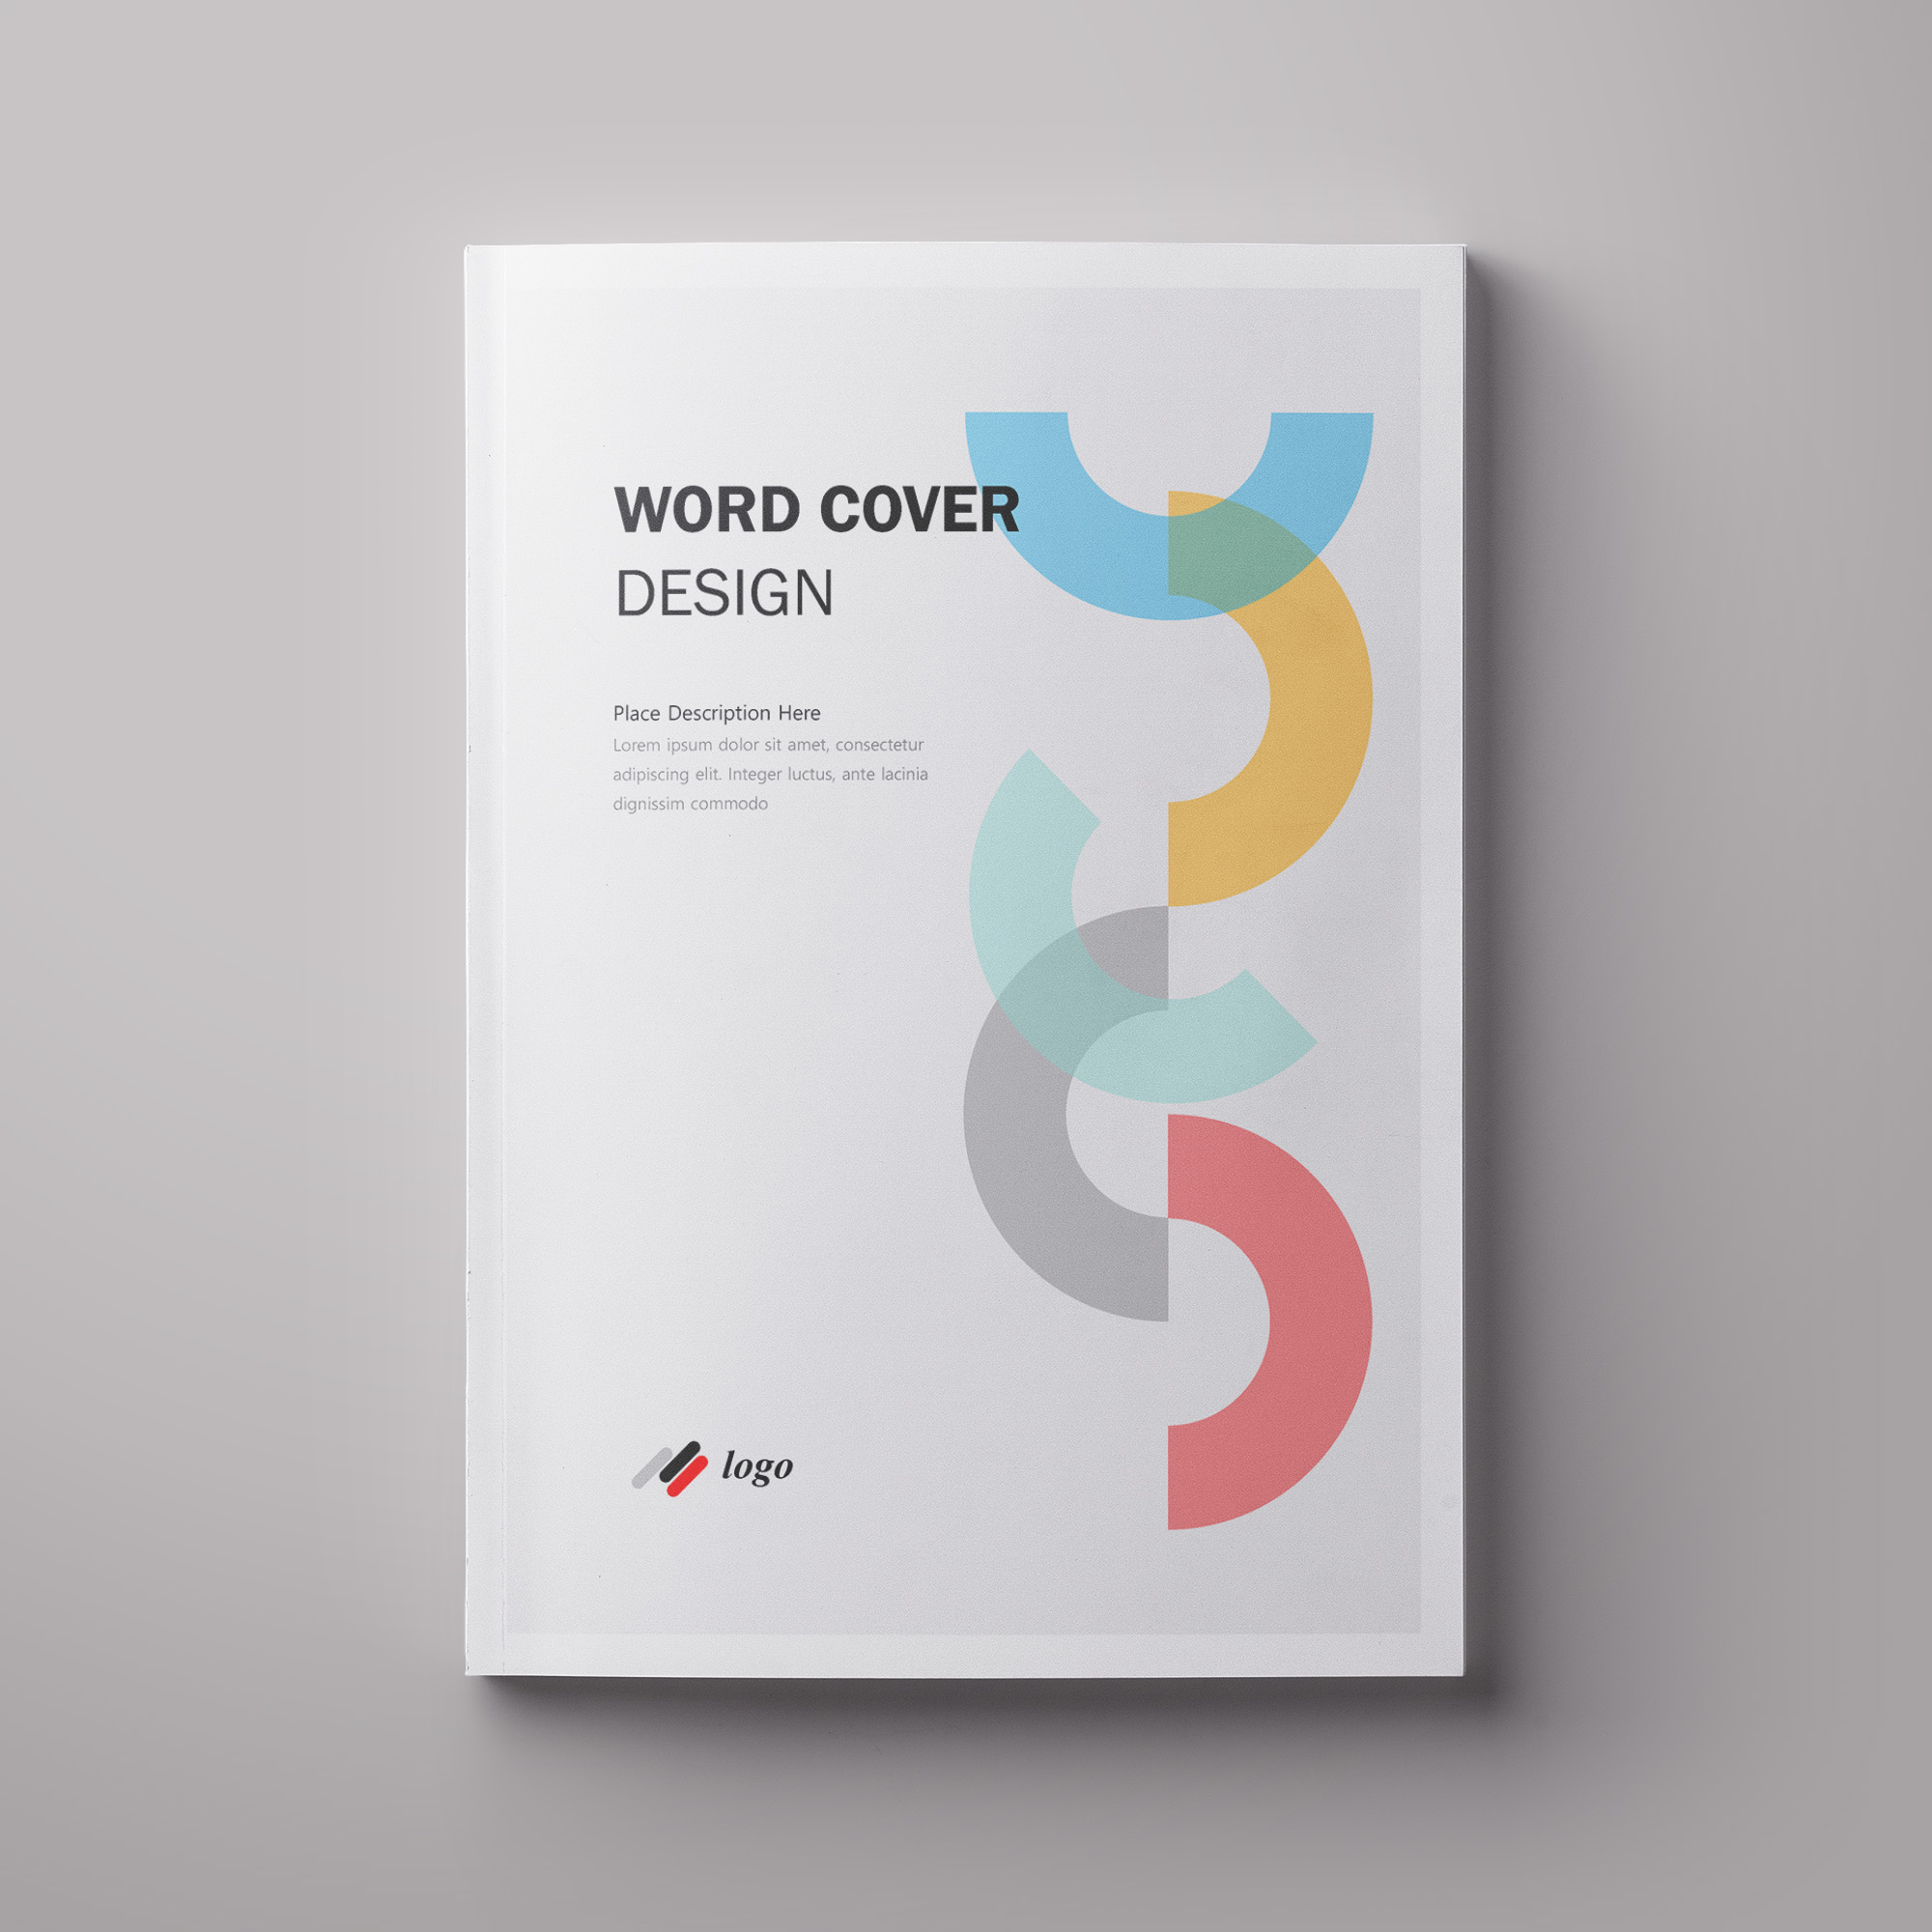 microsoft-word-cover-templates-10-free-download-word-free